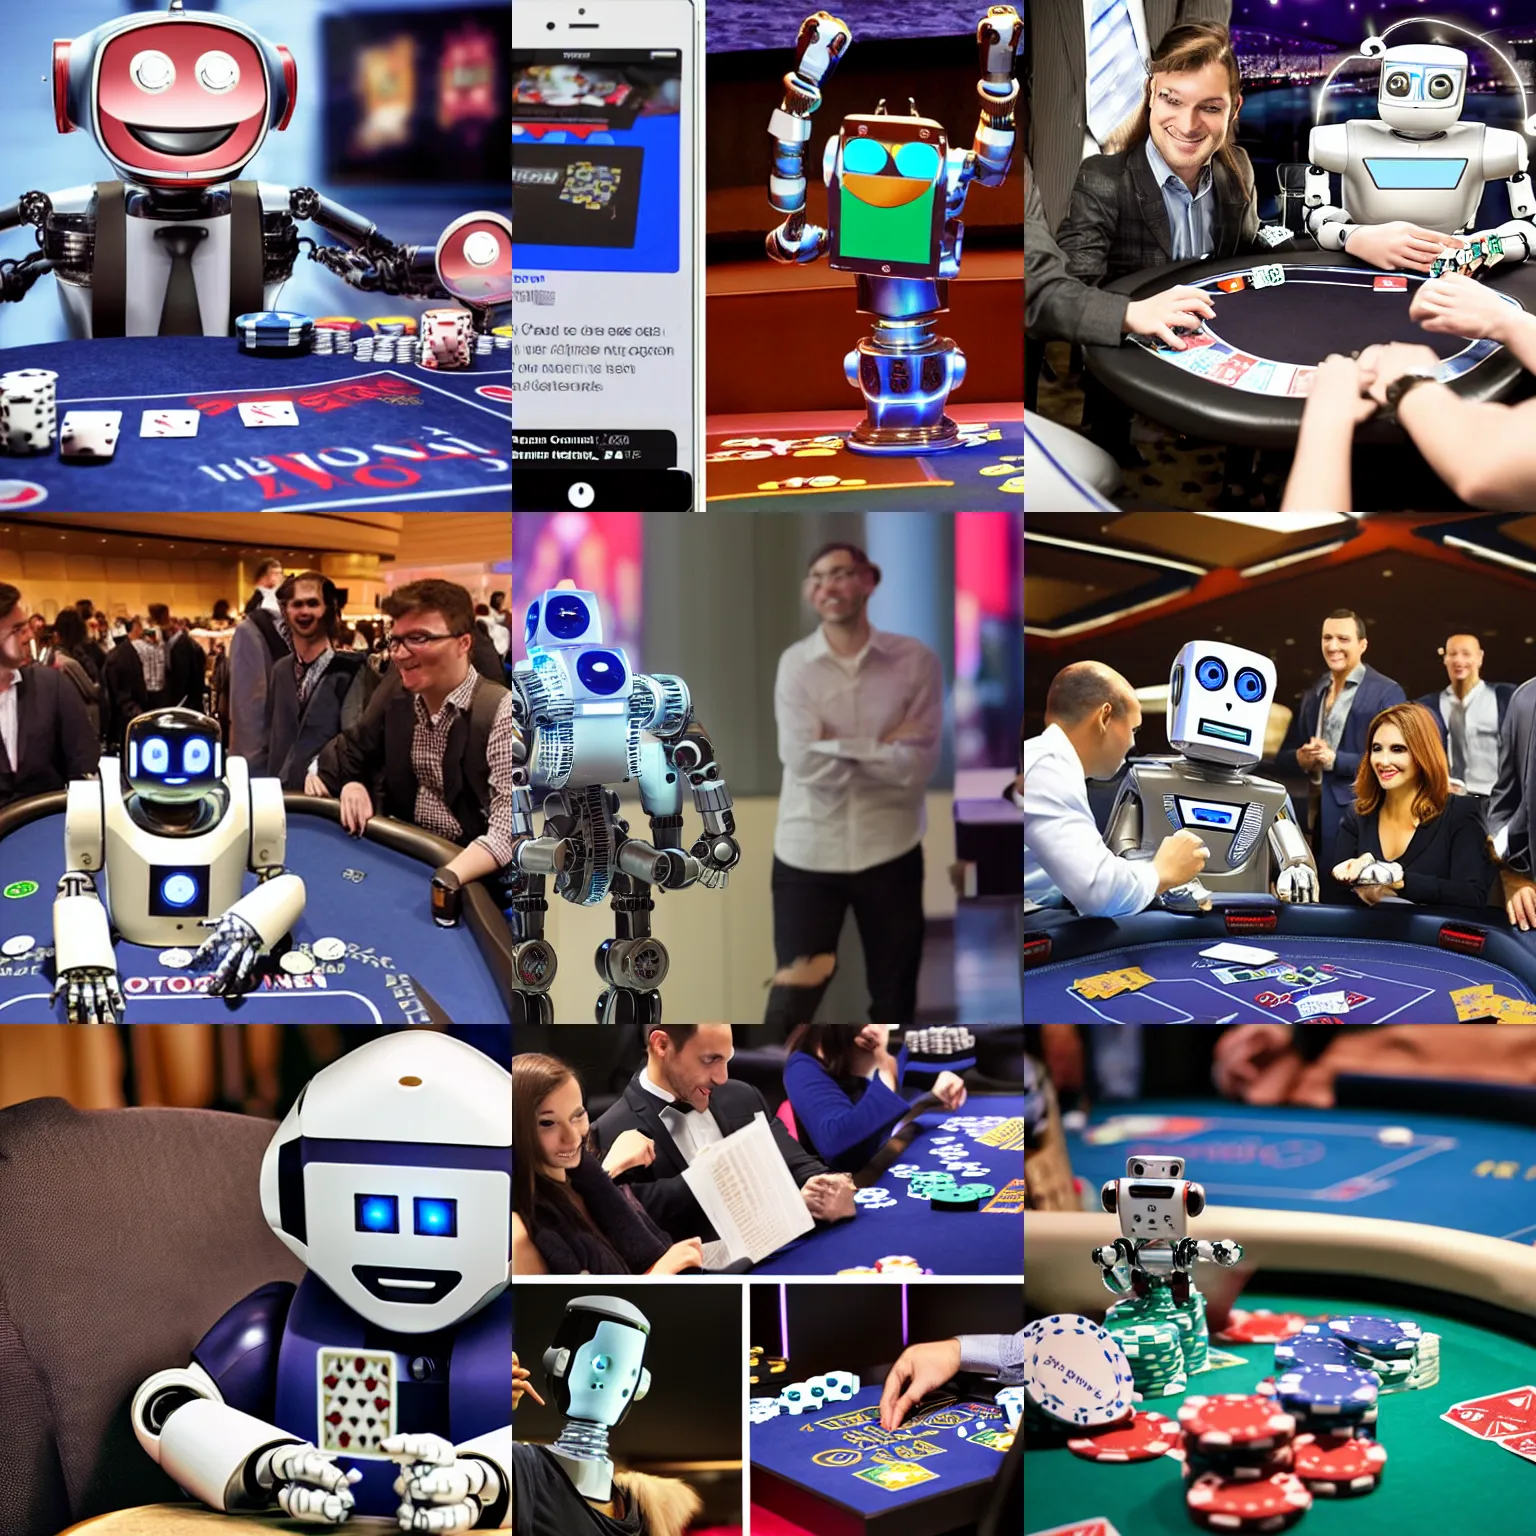 Prompt: <robot attention-grabbing traits='very-smart' location='las vegas convention center'>robot reacts to winning poker game</robot>